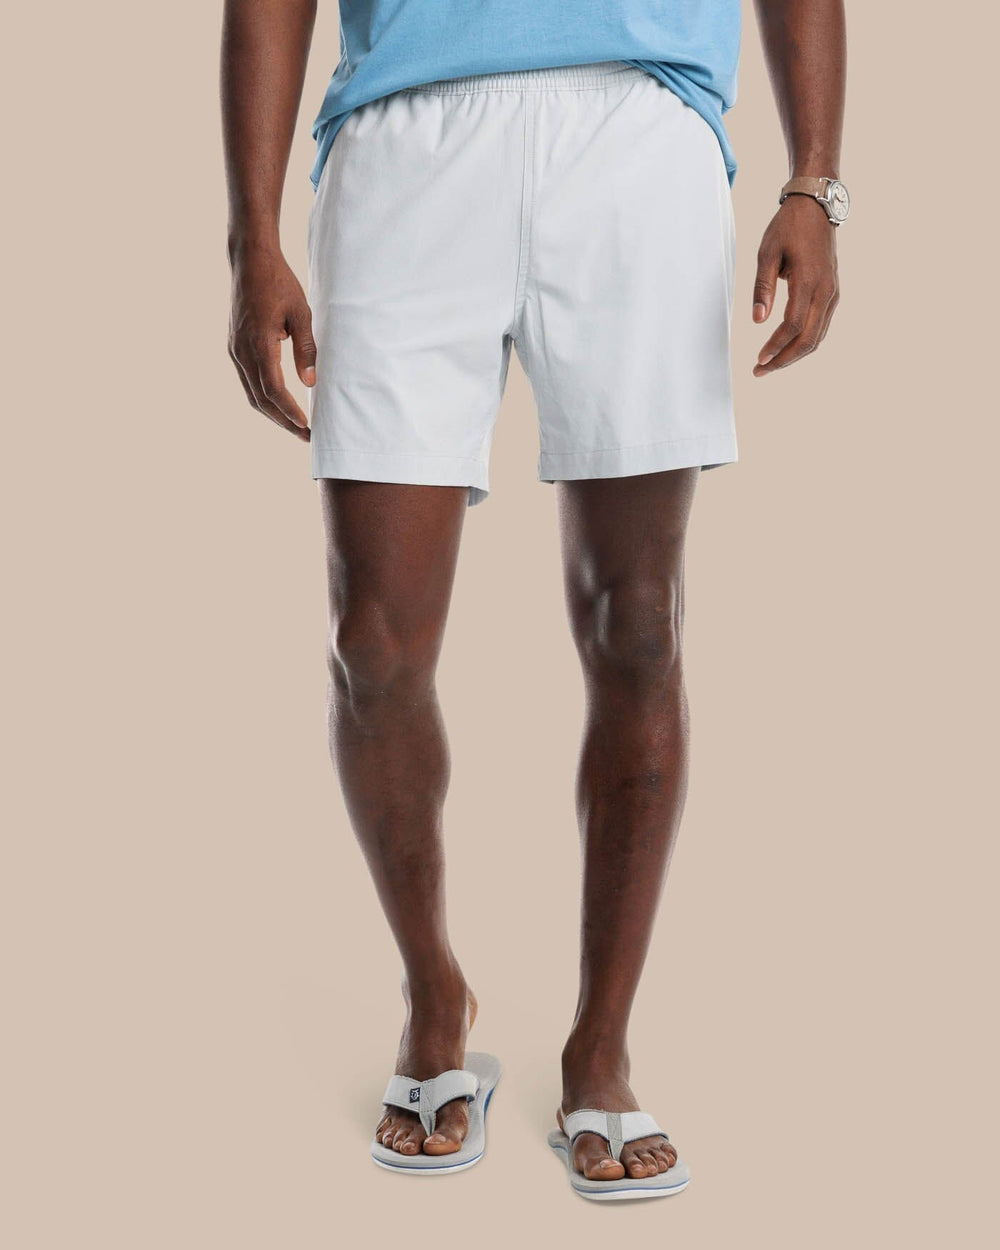 The front view of the Men's Rip Channel 6 Inch Performance Short by Southern Tide - Seagull Grey